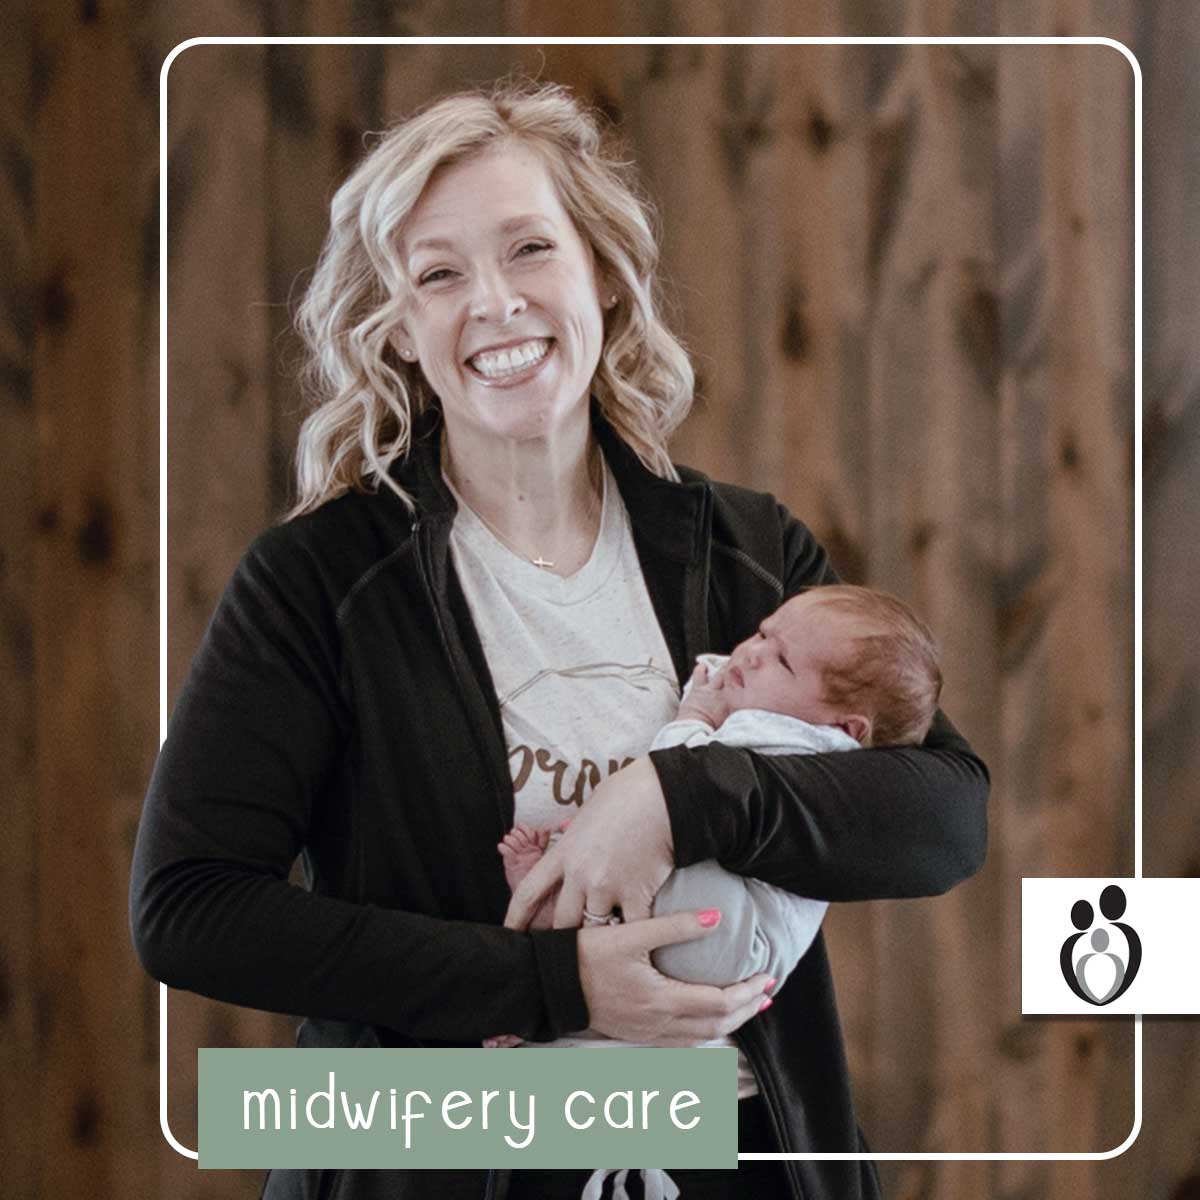 Midwife Audra DeGroot, CNM, ARNP, in Sioux Center, IA | Promise Community Health Center in Sioux Center, Iowa | Midwives in northwest Iowa, Midwives in southeast South Dakota, Midwives in southwest Minnesota | Midwives in Sioux Falls South Dakota, Midwives in Beresford South Dakota, Midwives in Sioux City IA, Midwives in LeMars IA, Midwives in Worthington MN, Midwives in Iowa, Midwives in South Dakota, Midwives in Minnesota